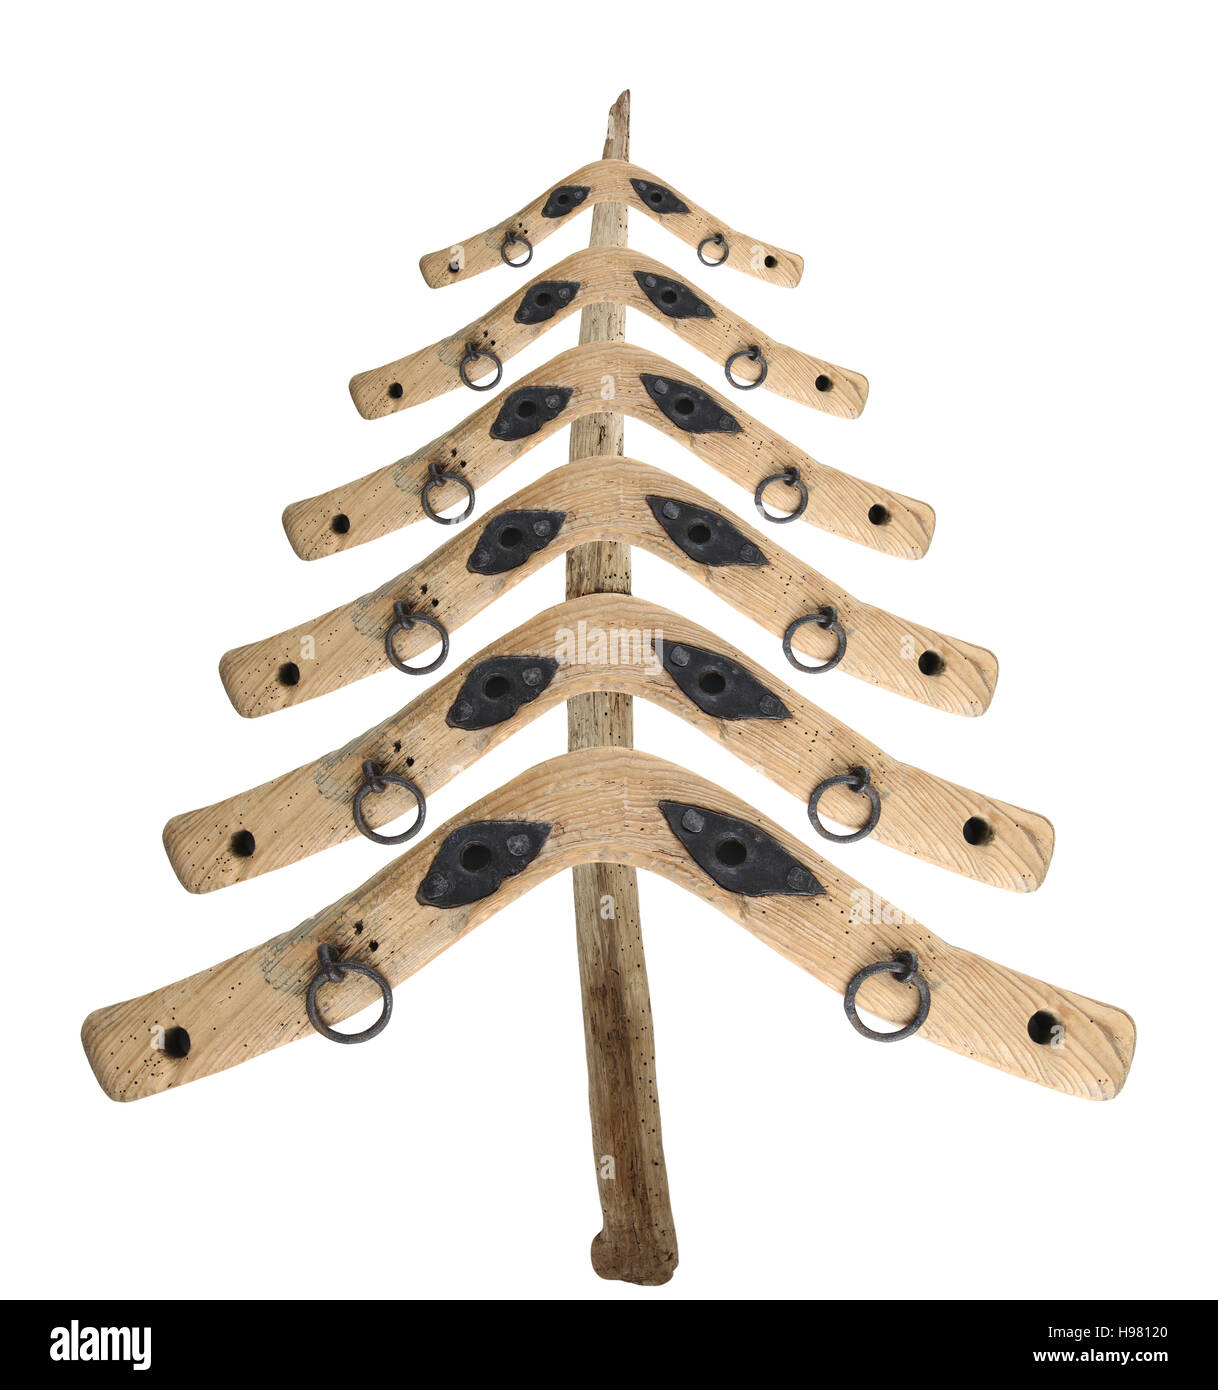 Bizarre Christmas tree from the old yokes of a piece of wood on white background Stock Photo